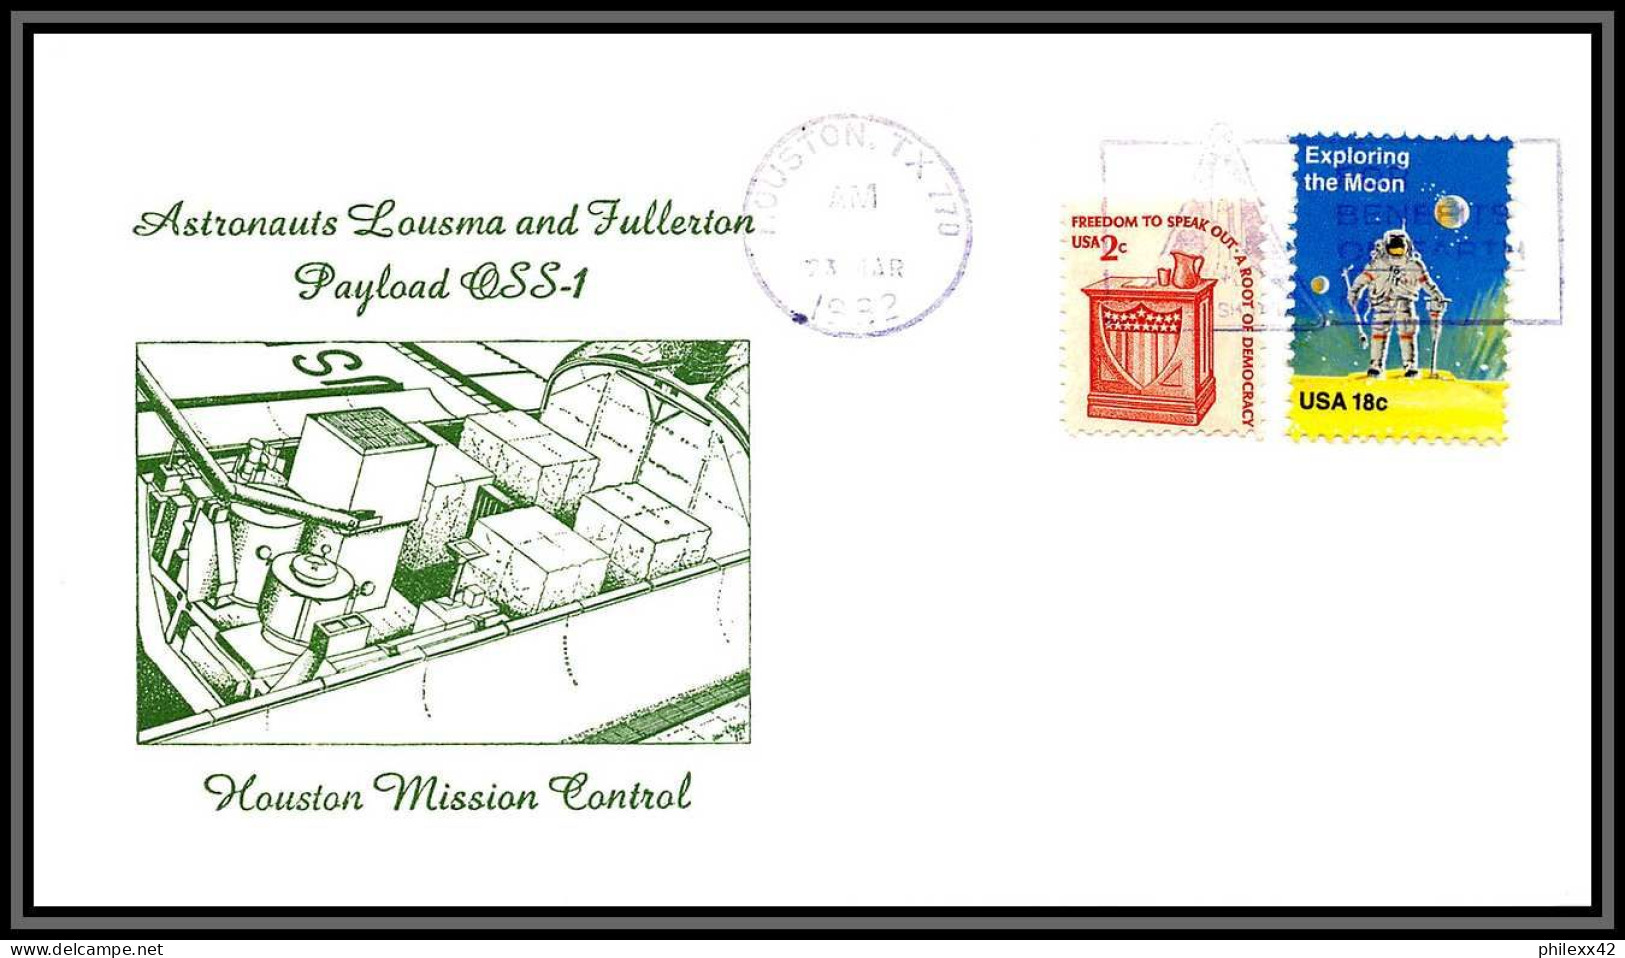 2889 Espace (space Raumfahrt) Lettre (cover Briefe) USA Sts-3 Payload Columbia Shuttle (navette) 23/3/1982 - Etats-Unis